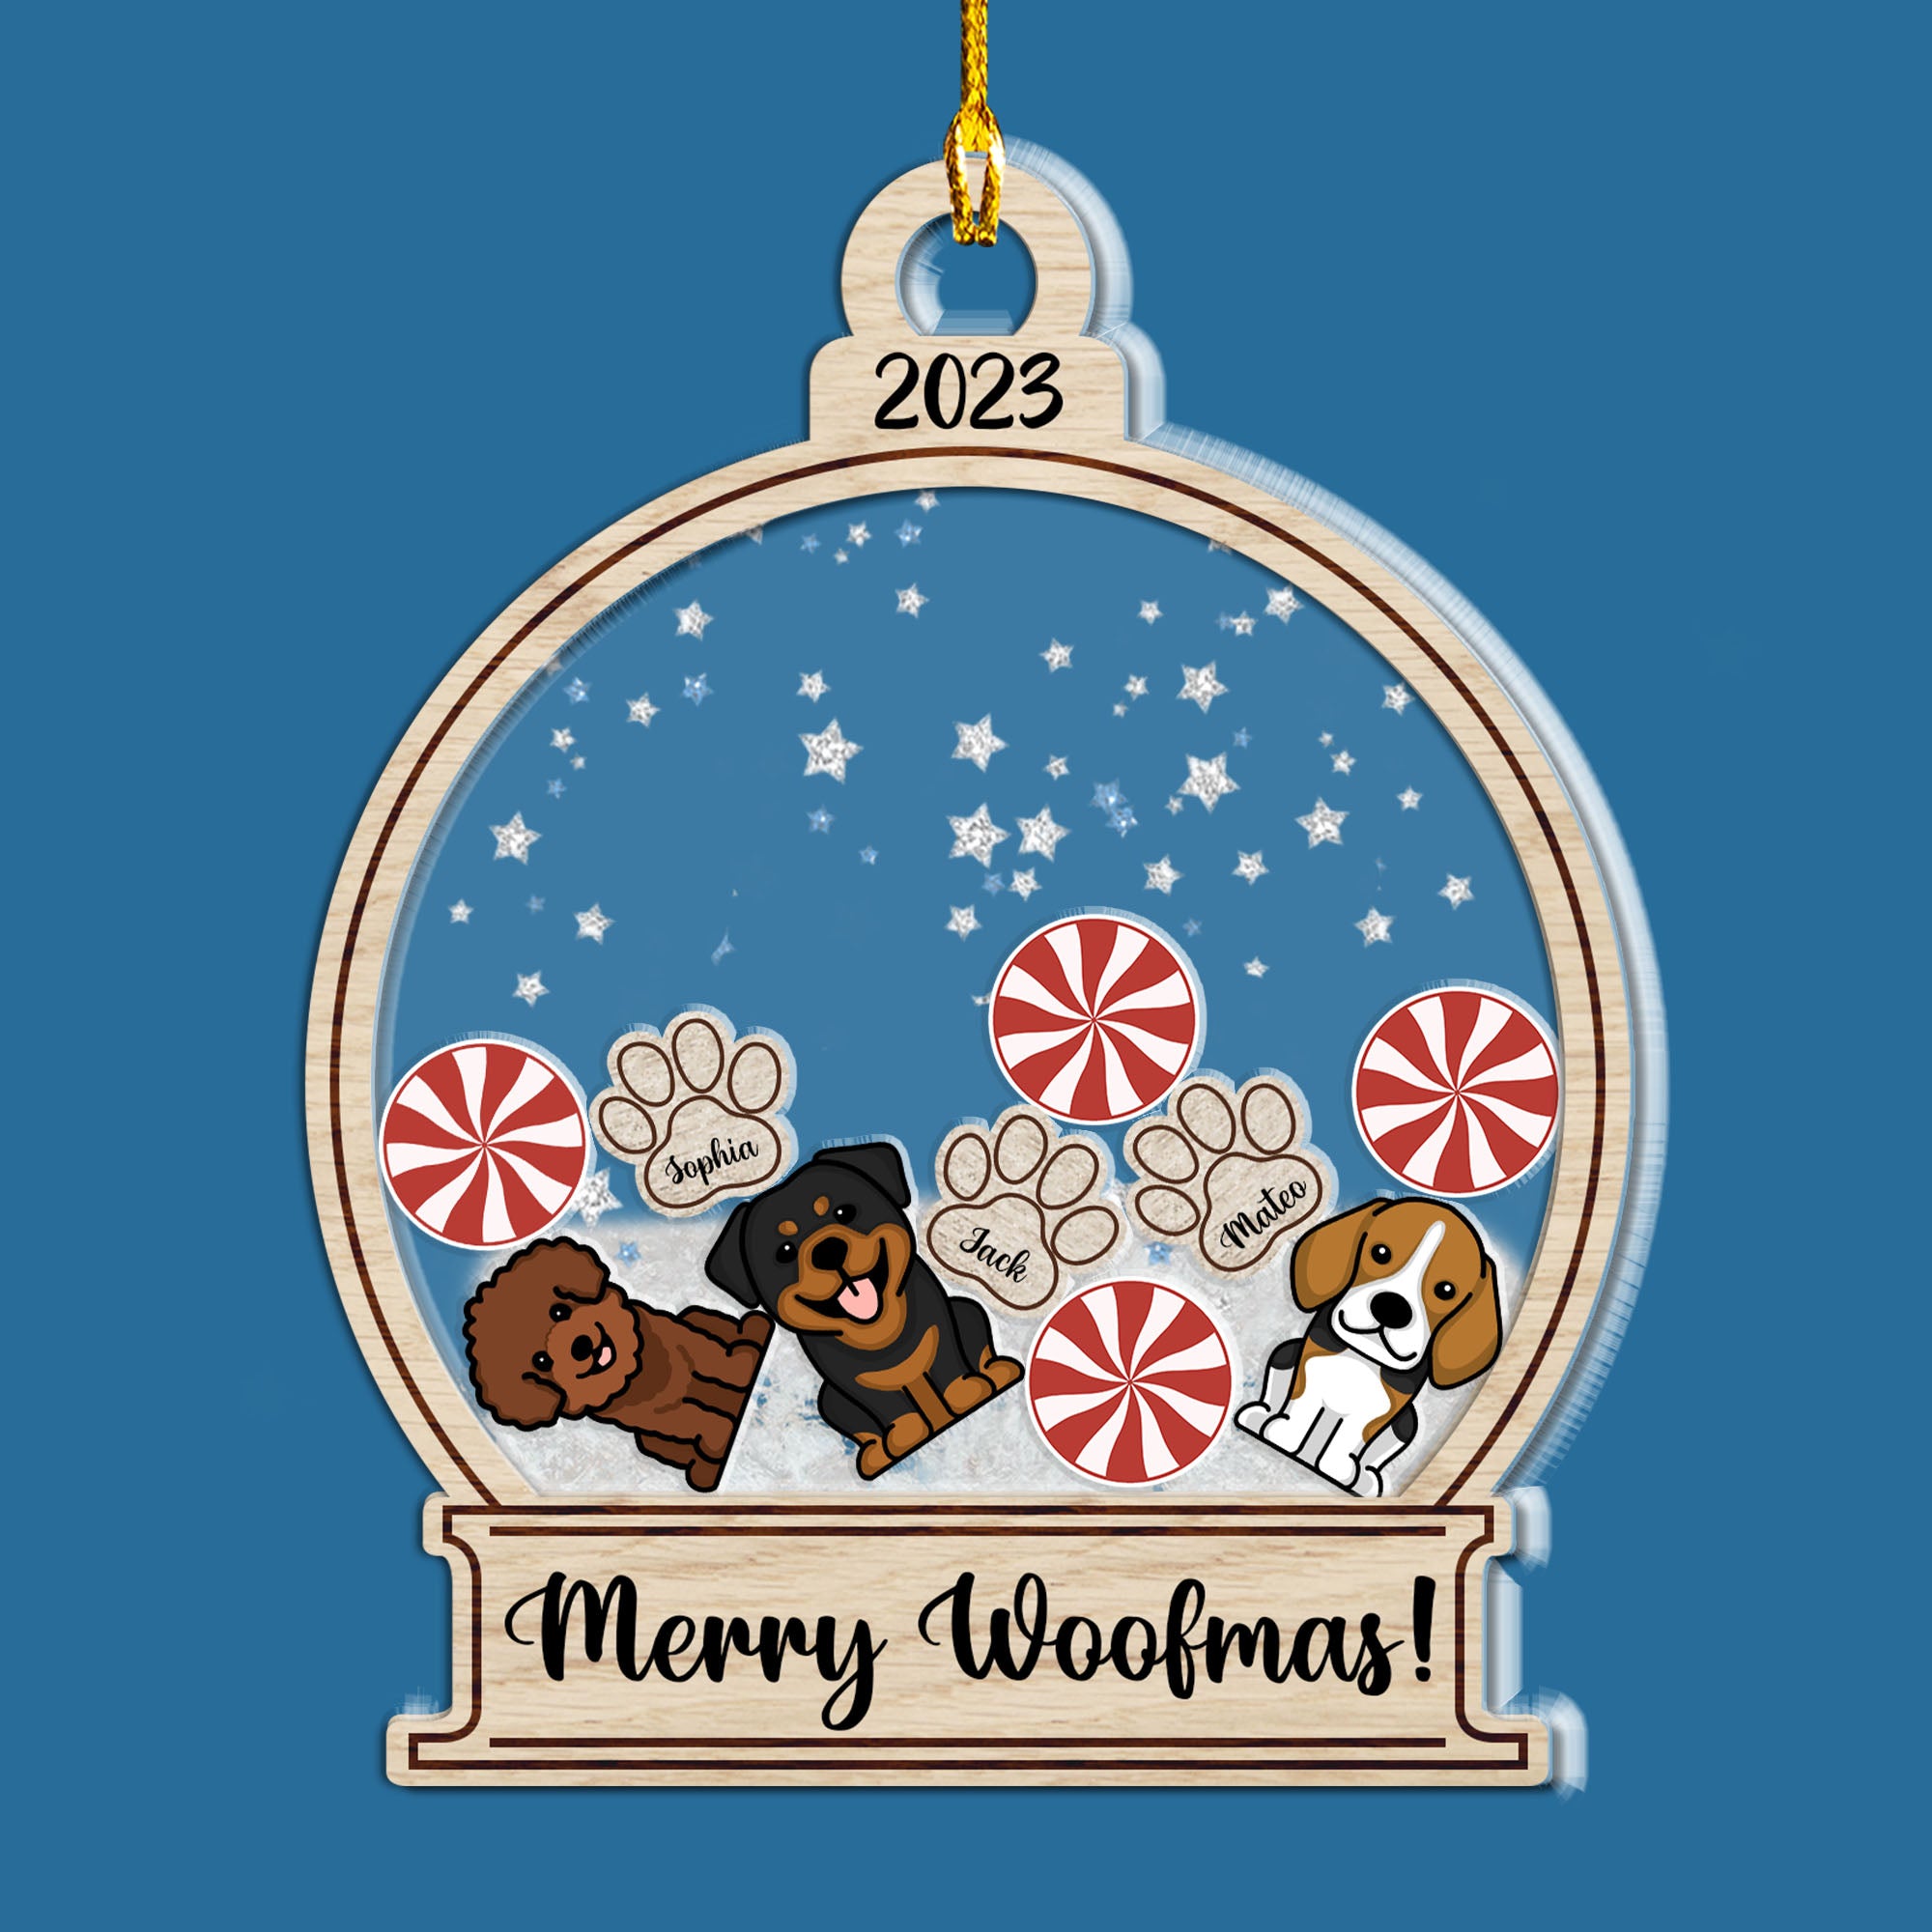 Merry Woofmas Candy Personlized Family Gift - Personalized Custom Shaker Ornament